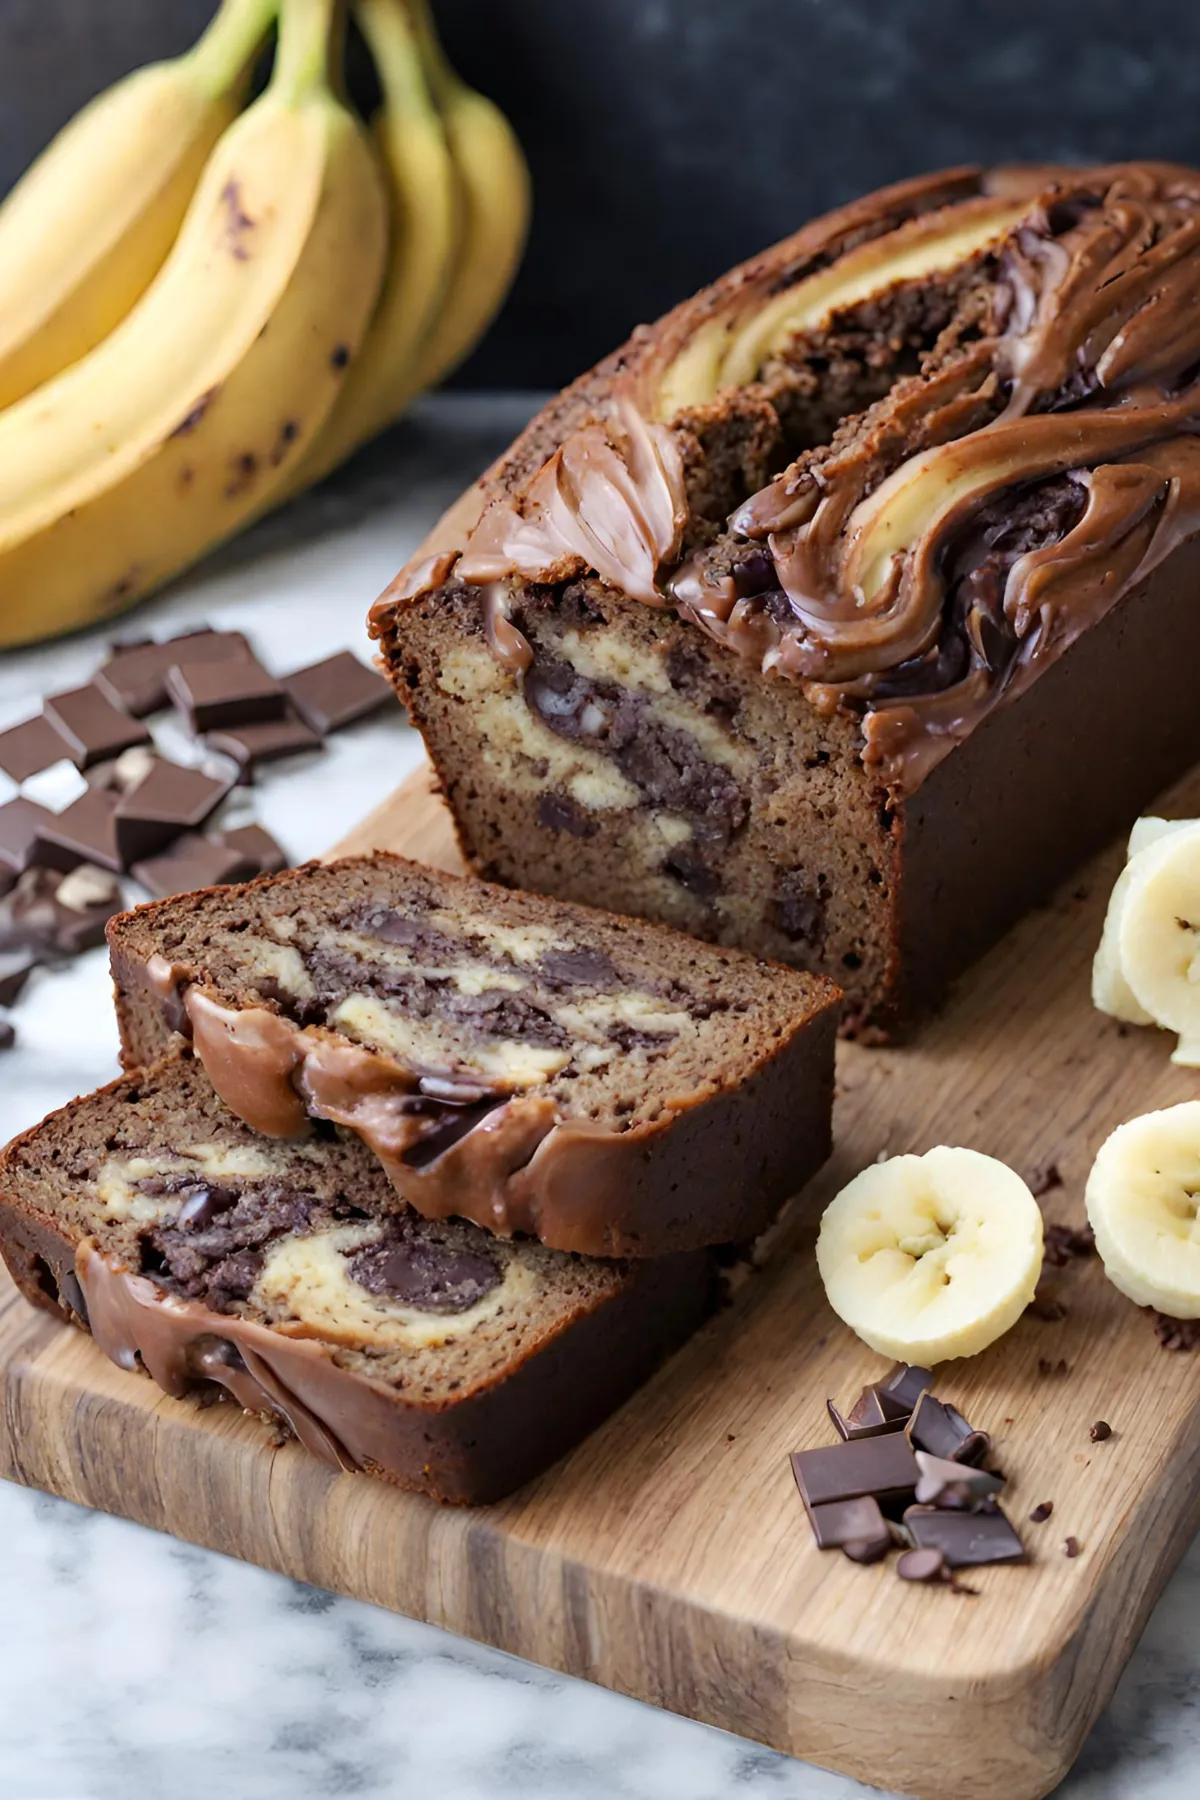 Chocolate Marbled Banana Bread Step-by-Step Baking Guide